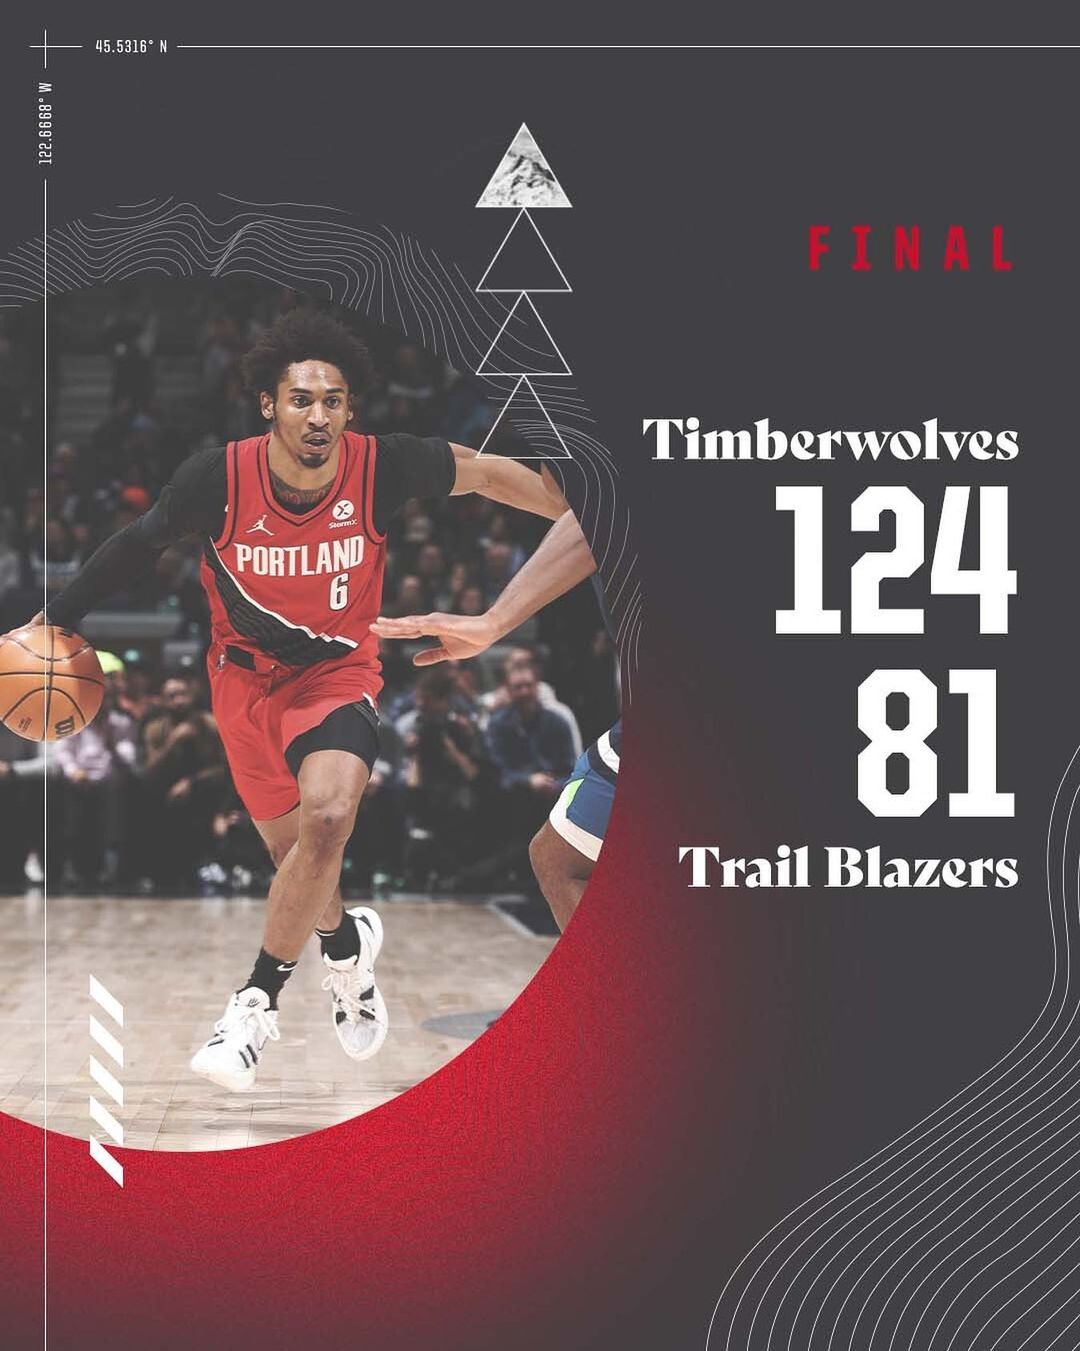 On to the next.  #RipCity...